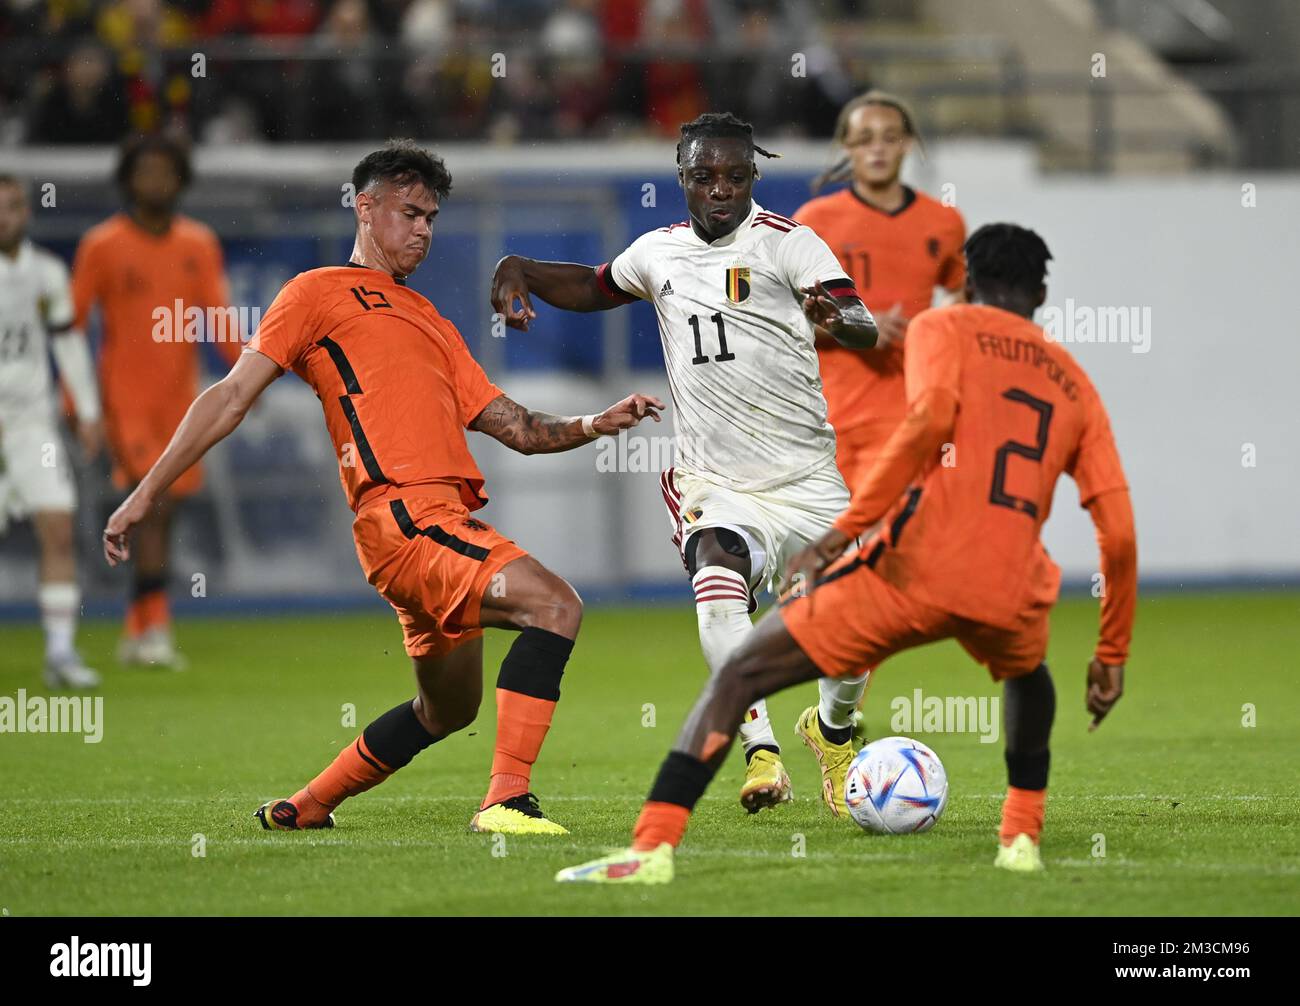 Jong Oranje's Mees Hilgers and Belgium's Jeremy Doku fight for the ball  during a friendly soccer game between the U21 teams of Belgium and the  Netherlands, Friday 23 September 2022 in Heverlee.